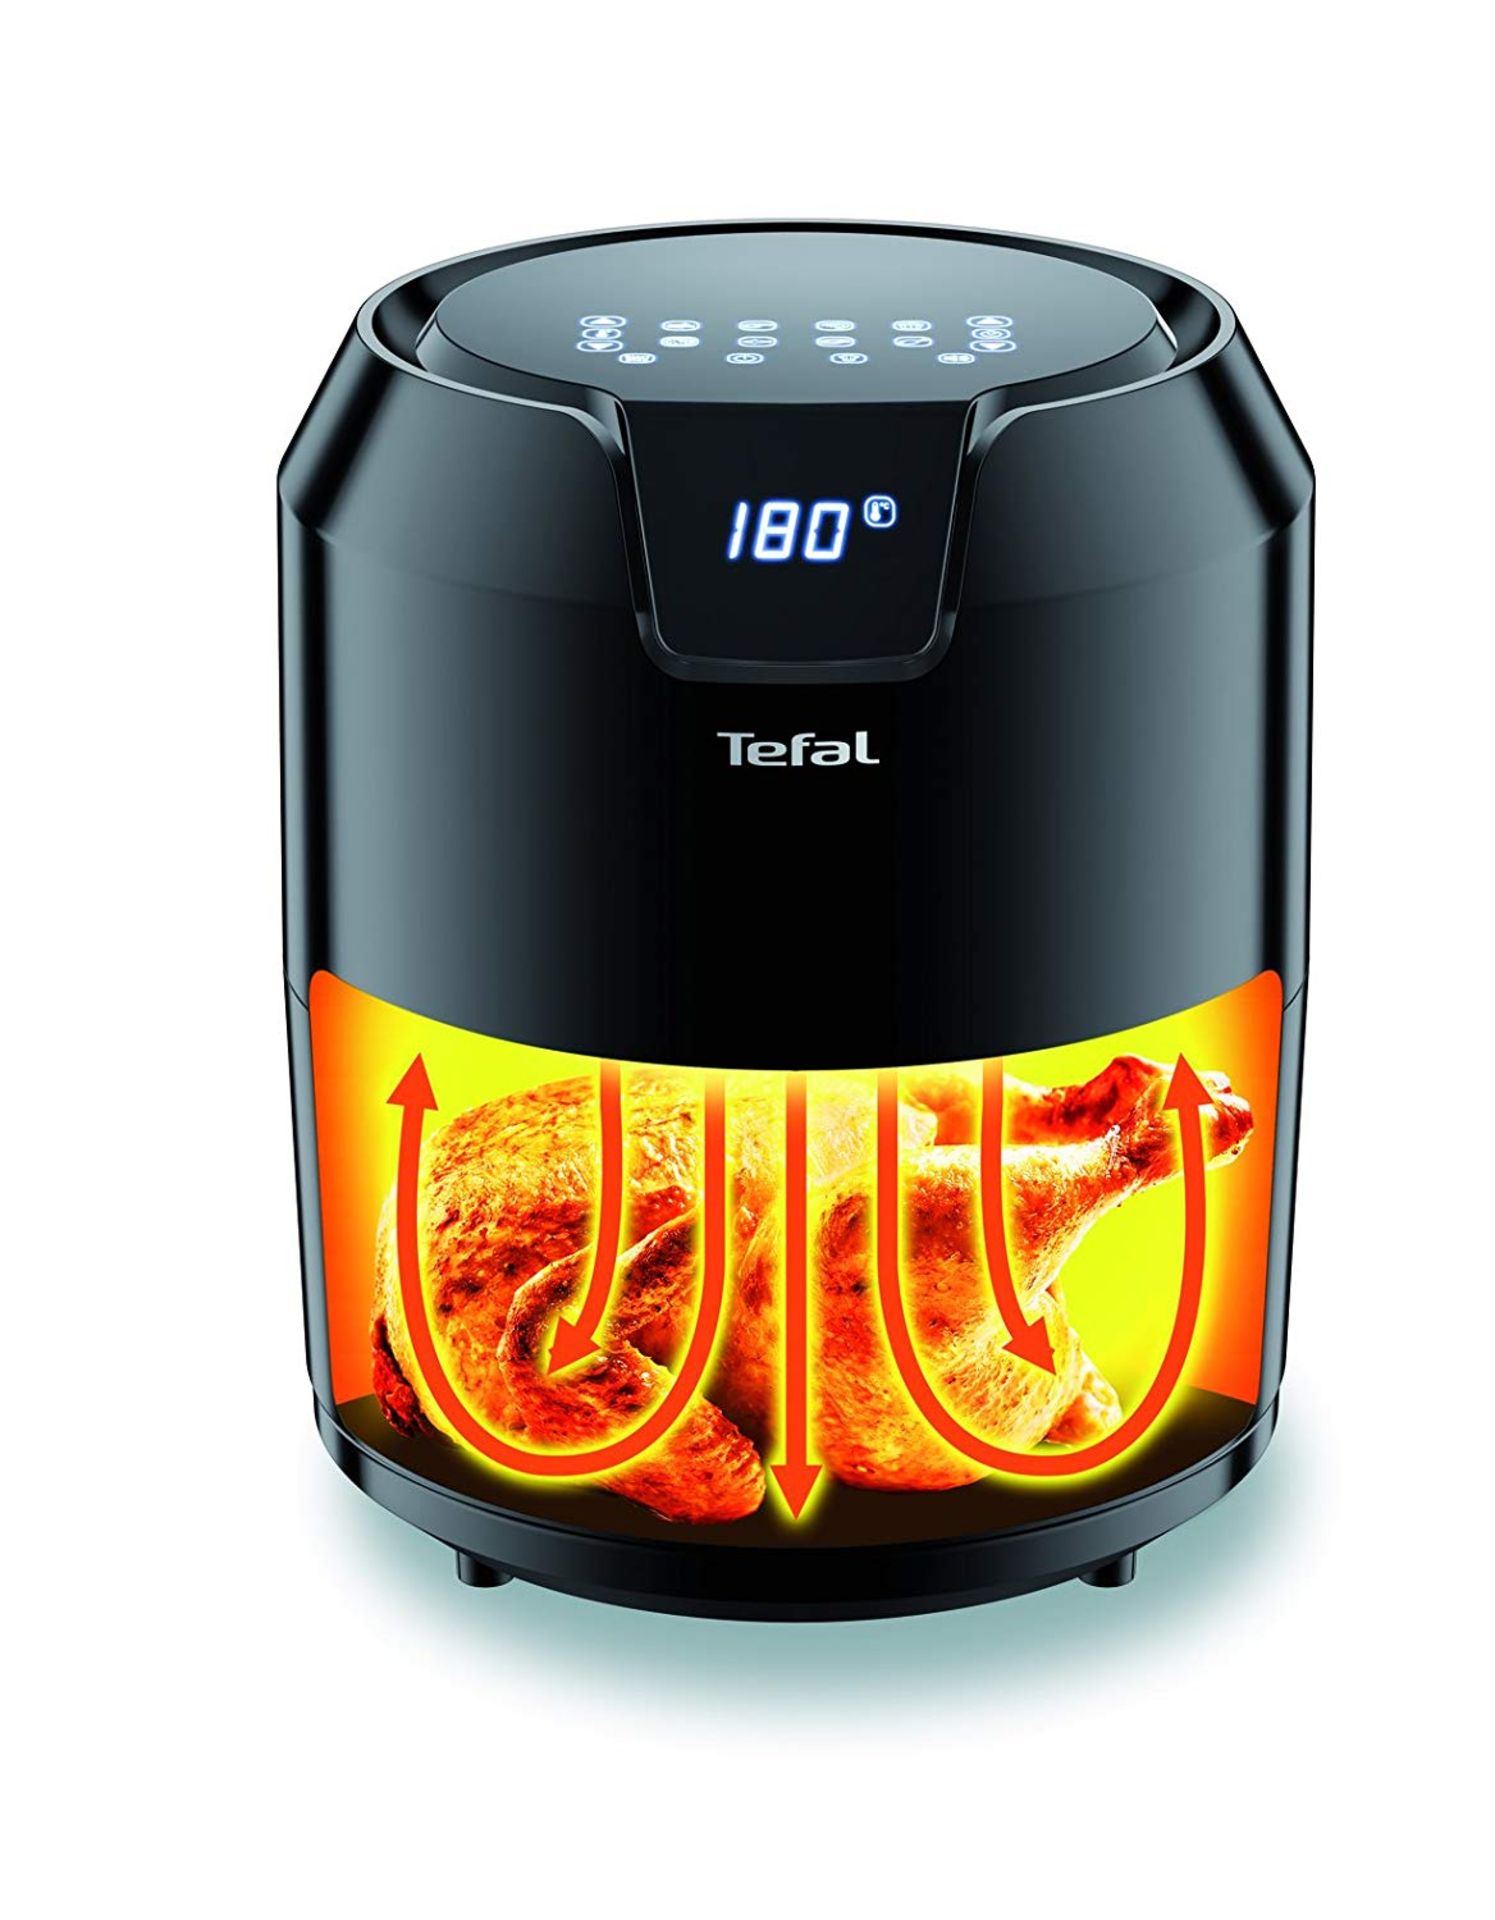 V Brand New Tefal Easy Fry Precision Hot Air Fryer - 1.2KG Capacity - Only One Spoonful Of Oil - Image 2 of 2